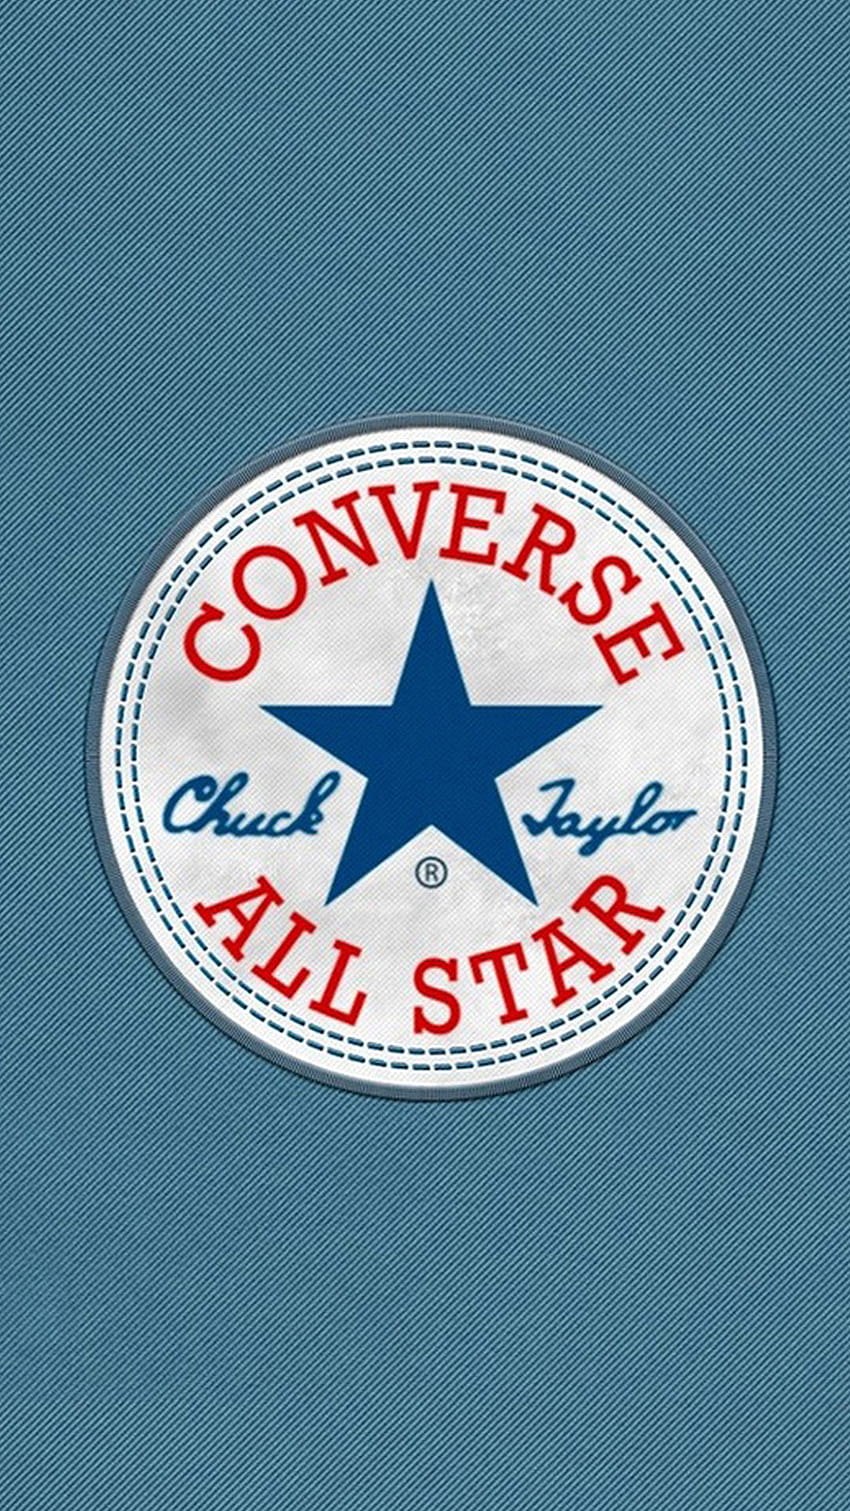 Converse All Star Blue 로고 Android, Android 스포츠 로고 HD 전화 배경 화면